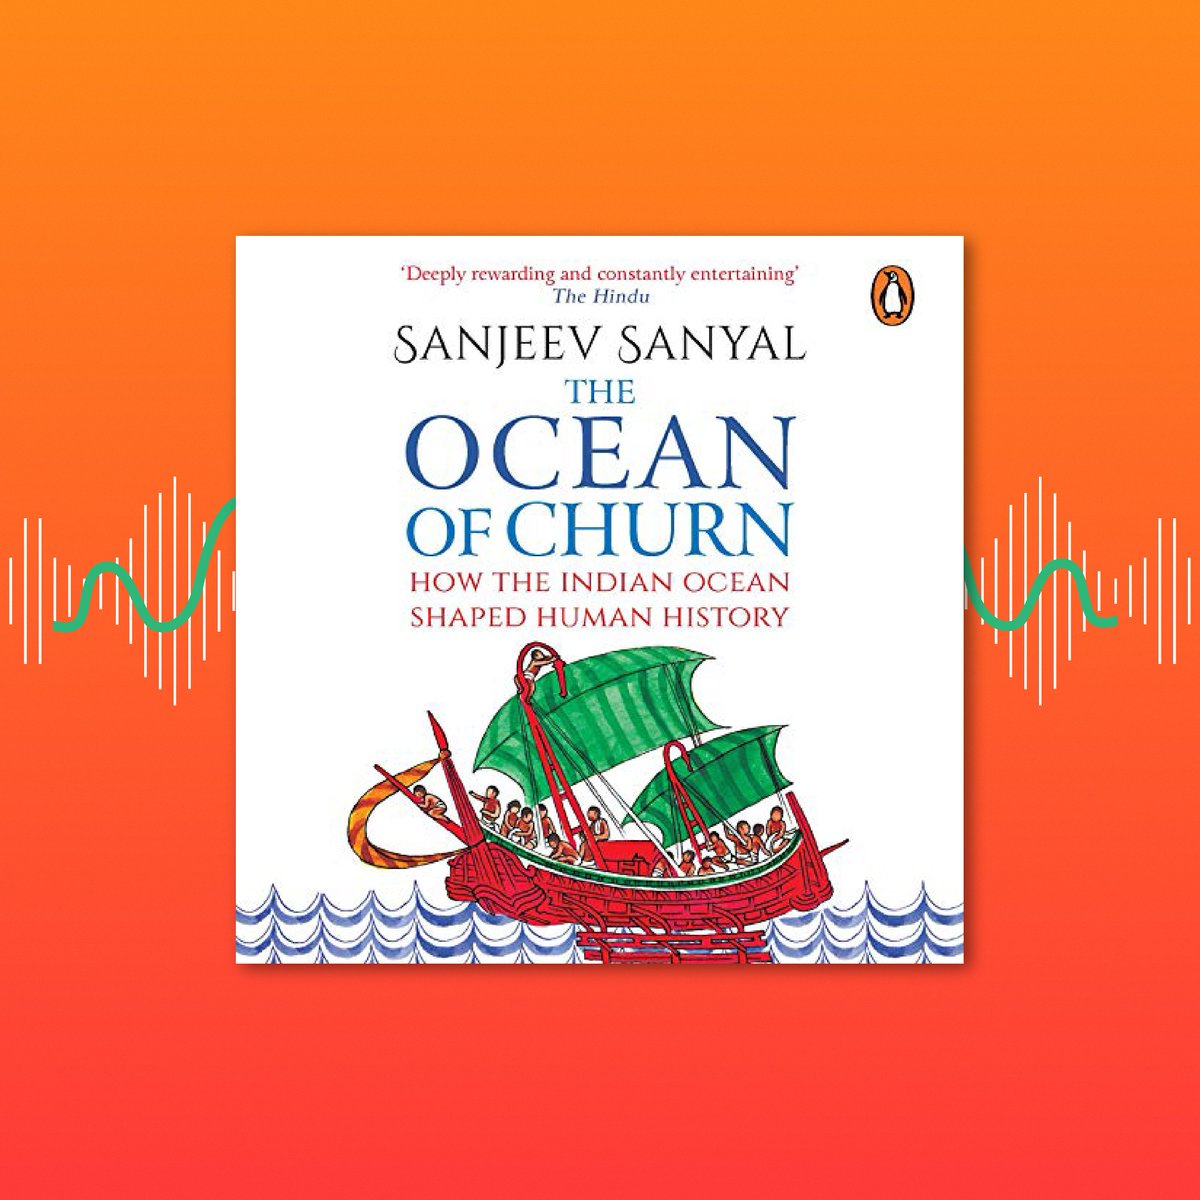 Explore India's history with these incredible audiobooks by @sanjeevsanyal. Tune in now! 🎧 bit.ly/3CR1ipk bit.ly/3MJZHq2 @audible_com